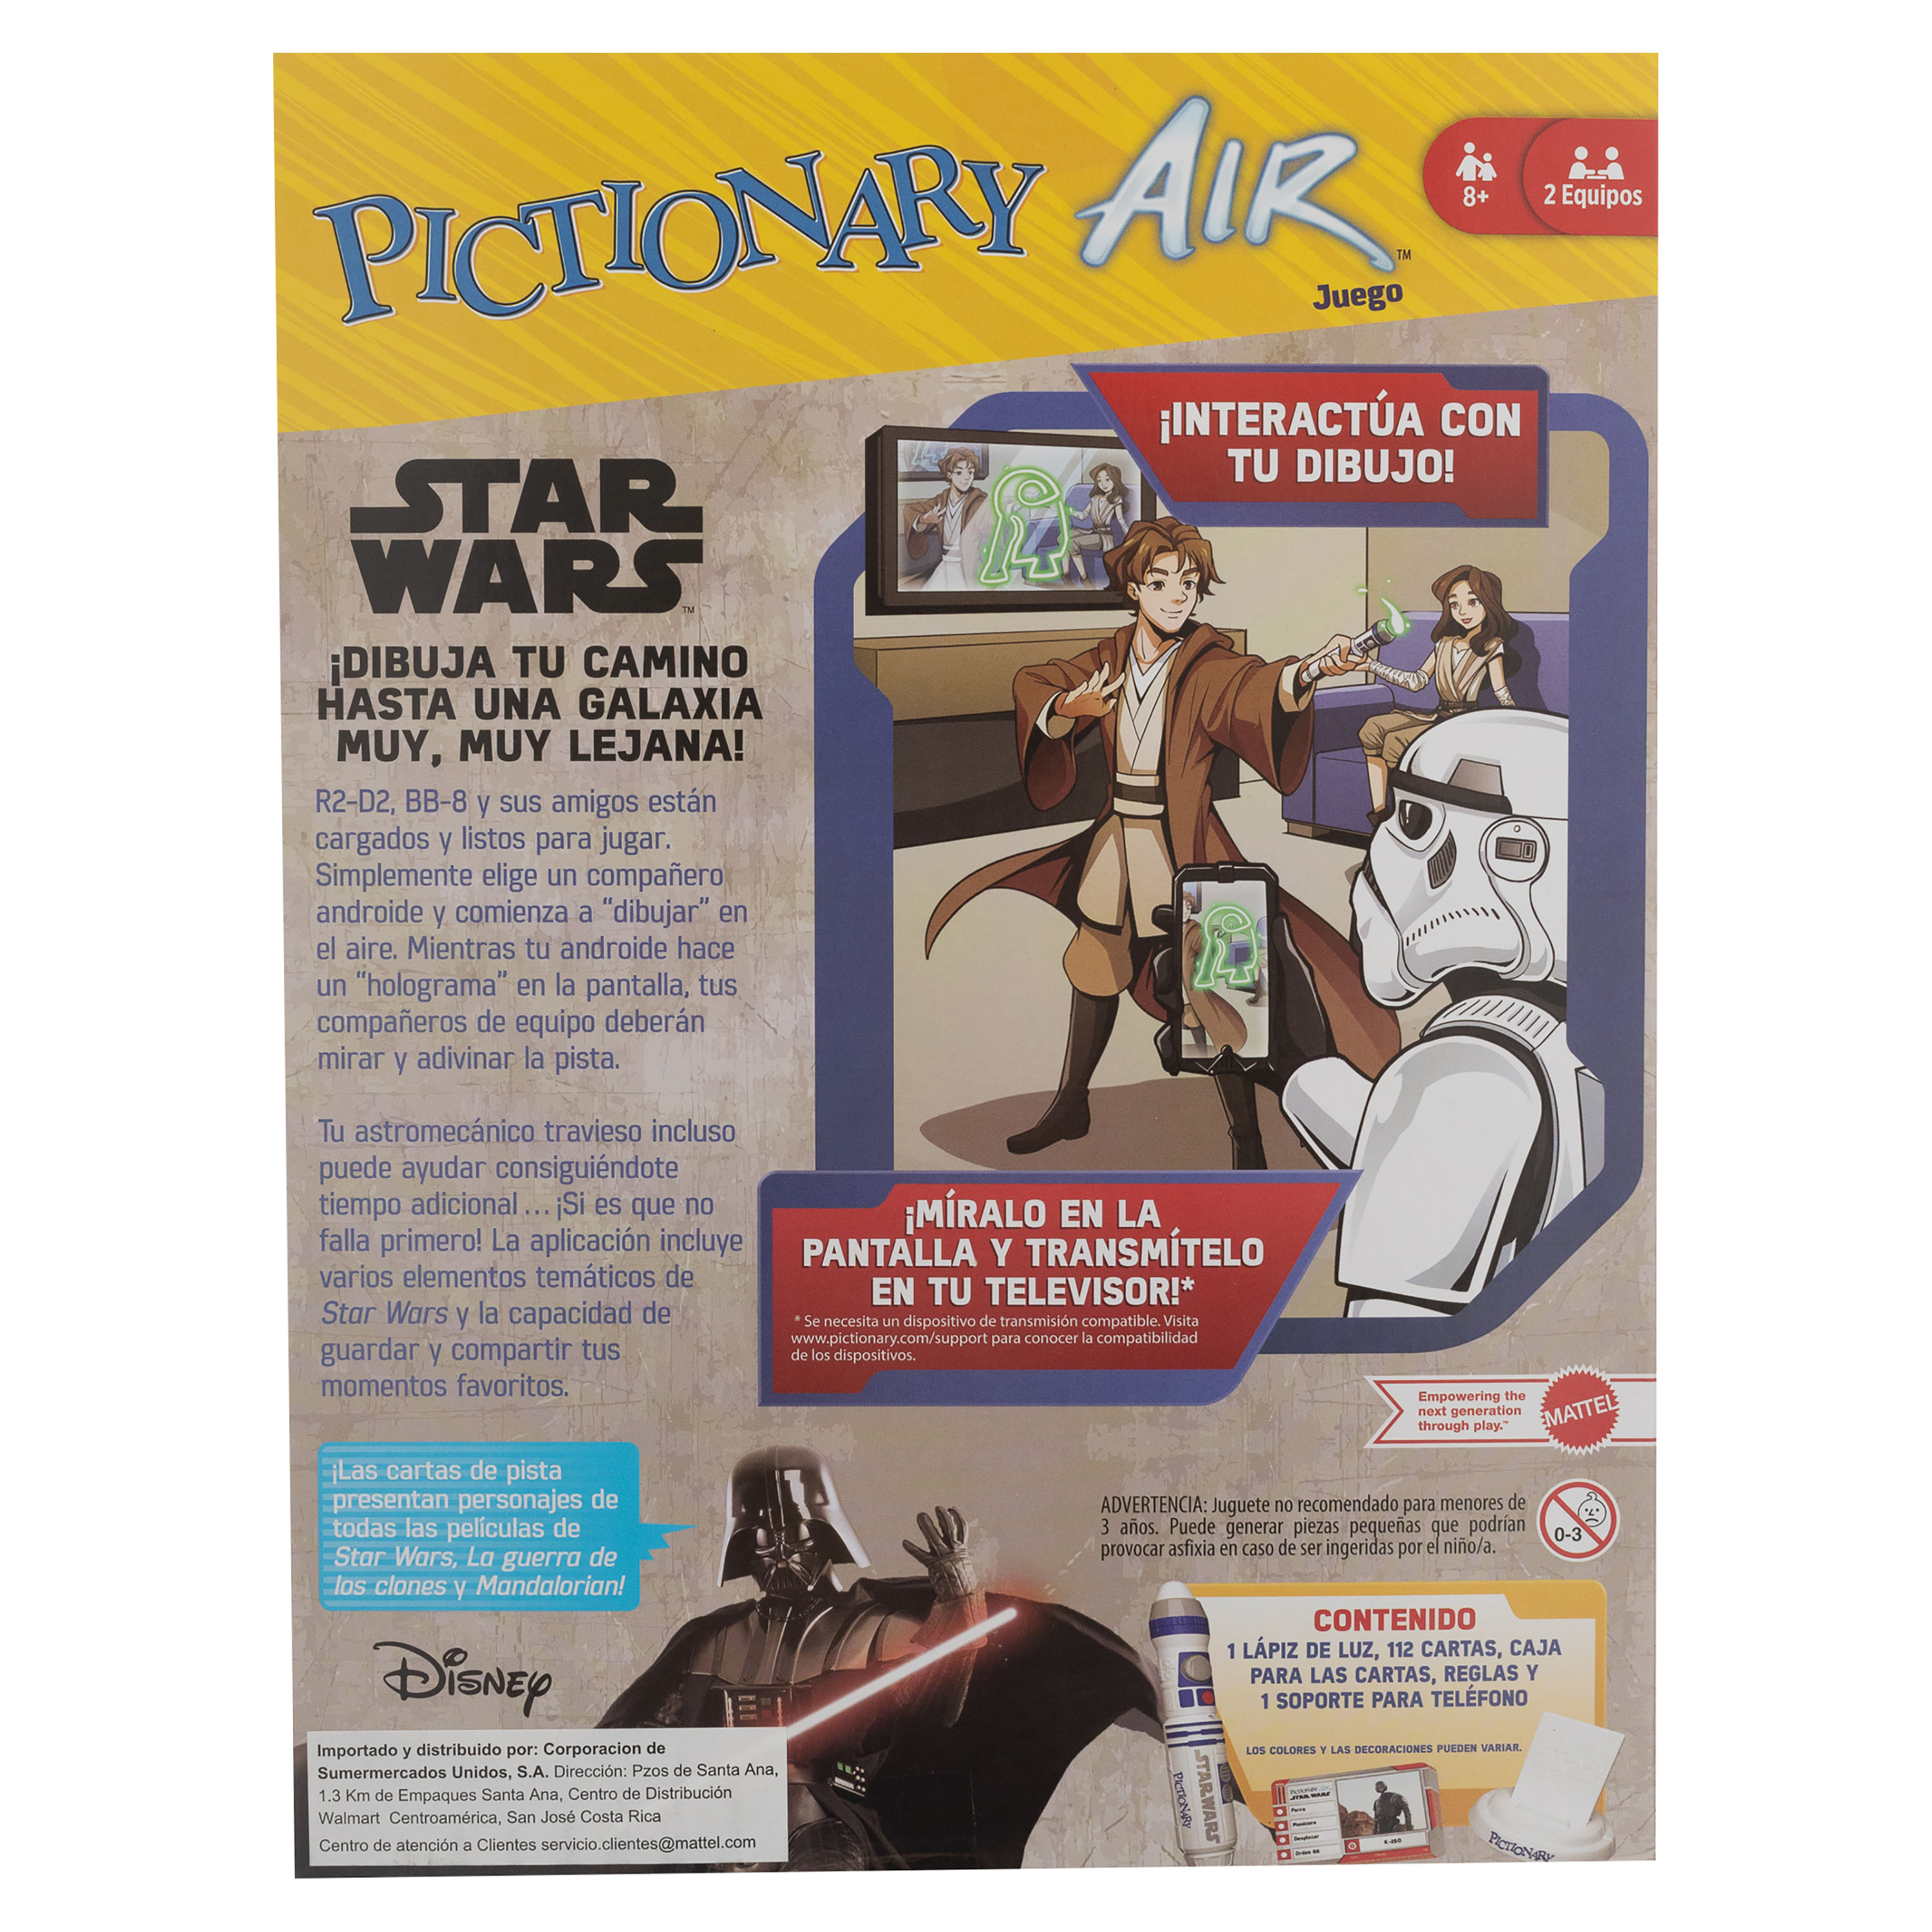 Pictionary Air Star Wars Edition 